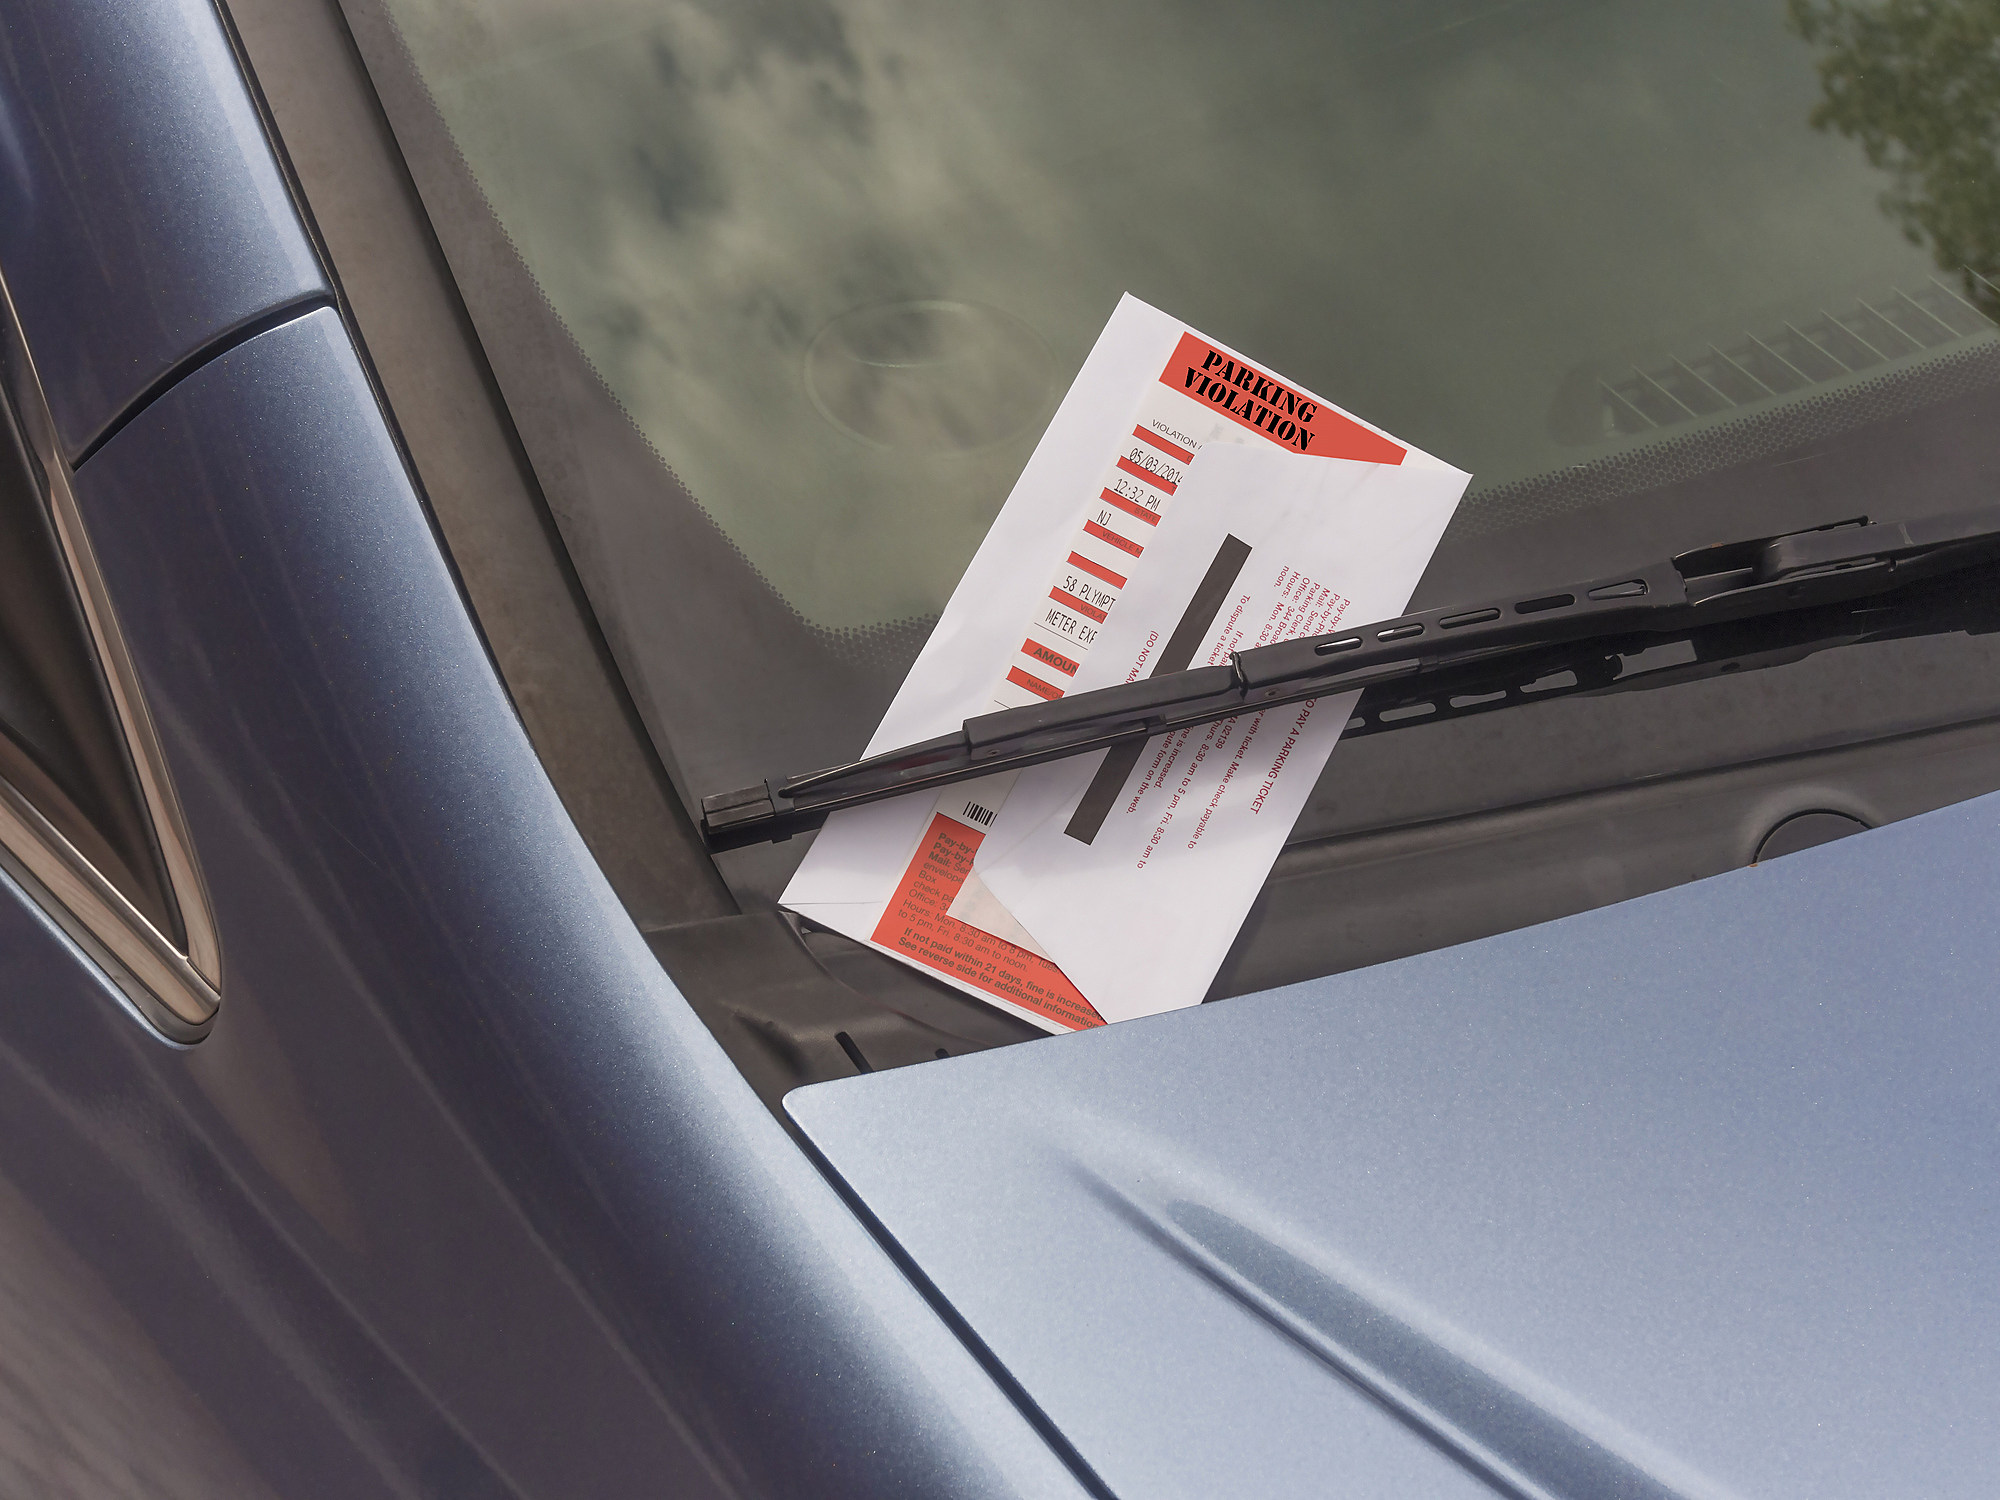 do you have to pay parking tickets on rental cars? 2